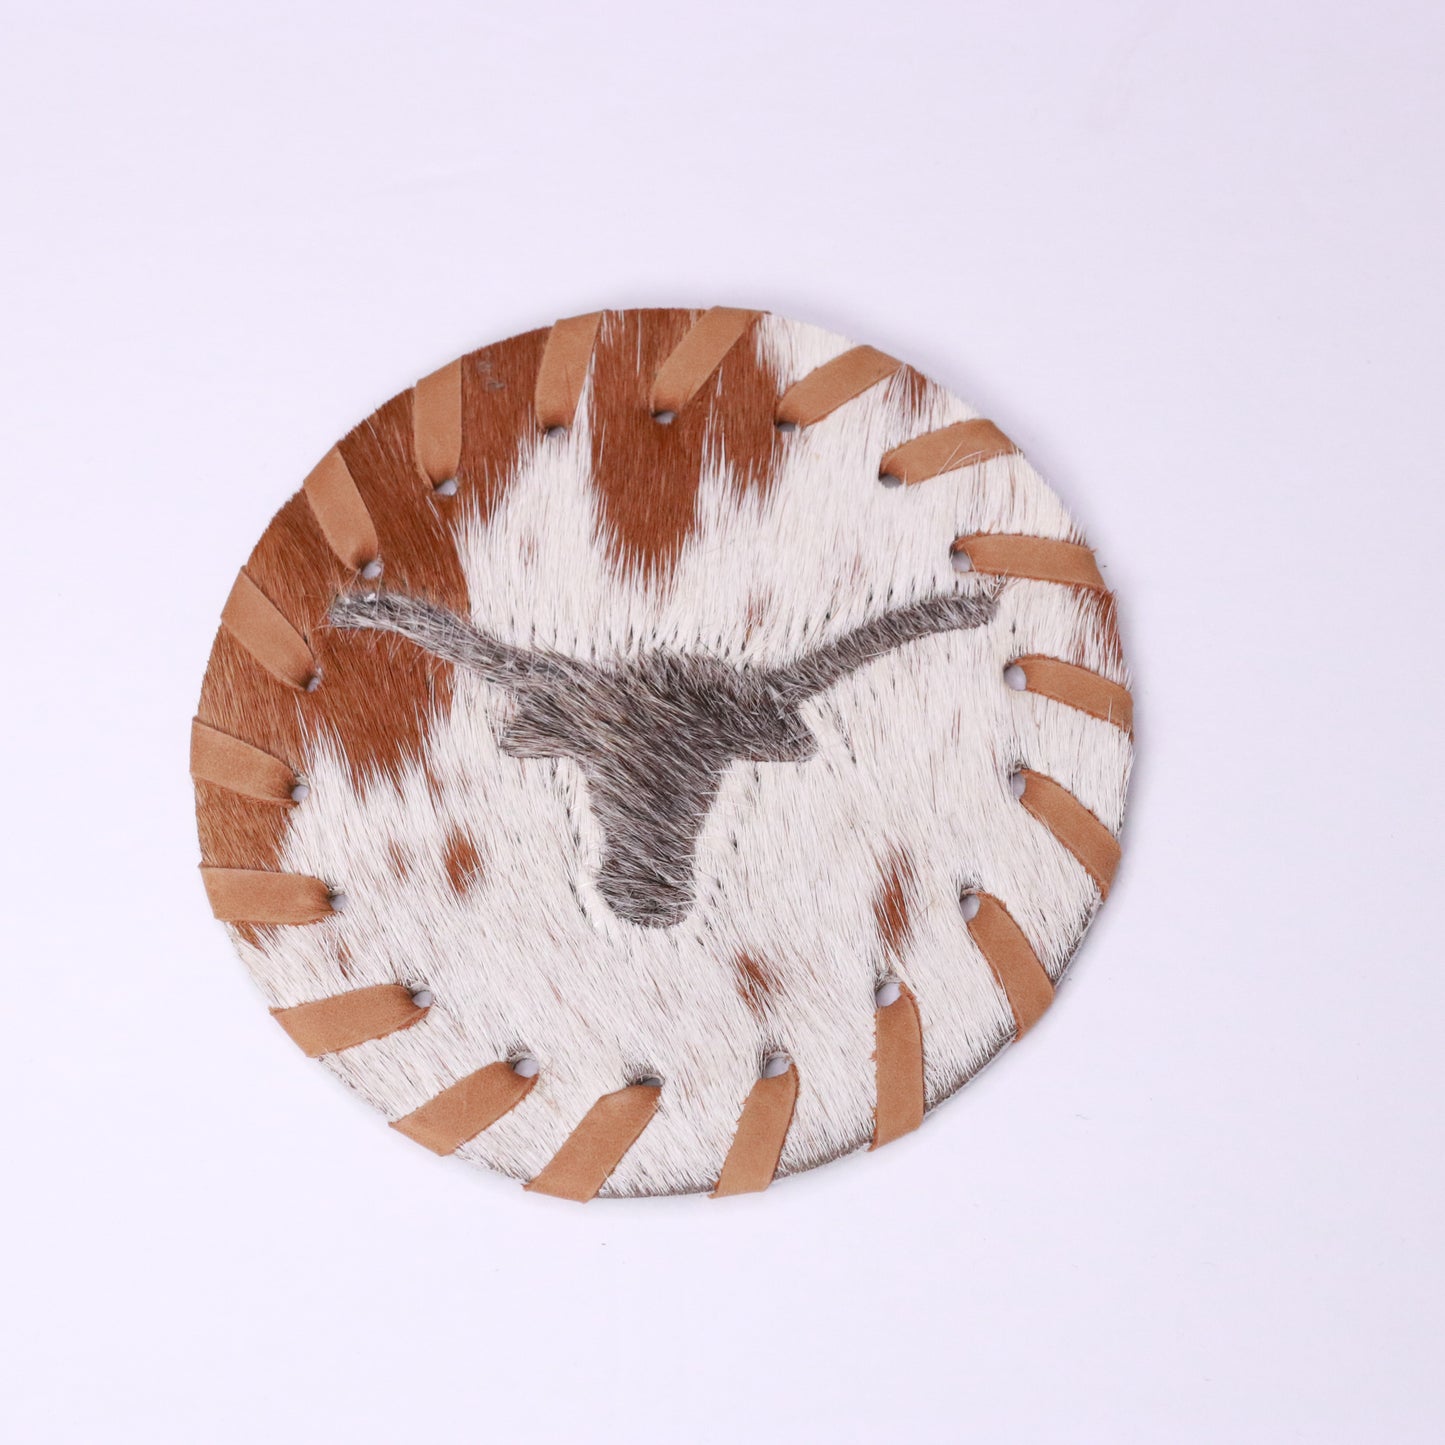 Texas Themed 10 piece Cowhide Coasters Set